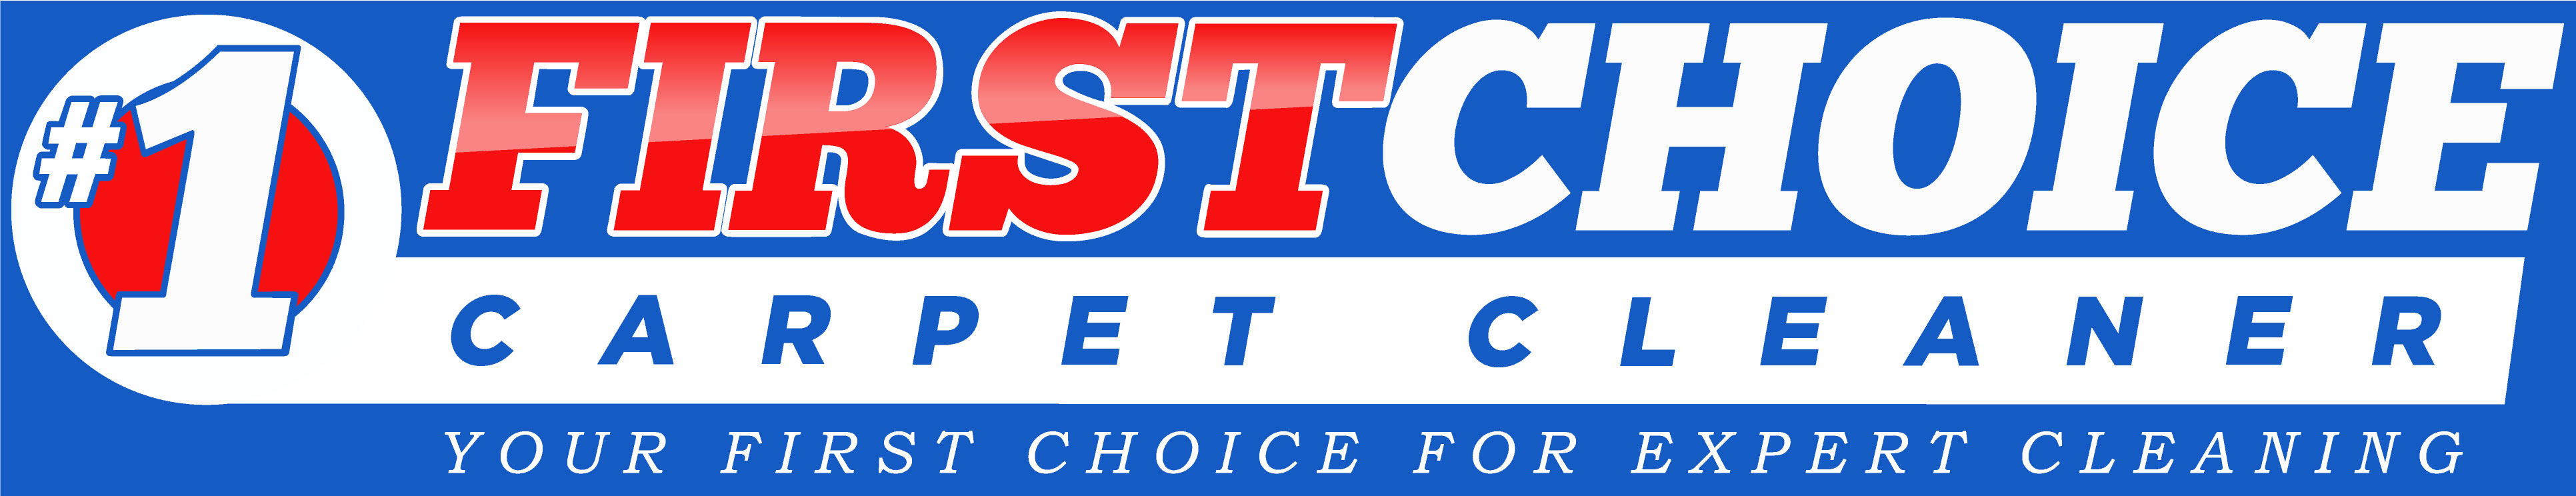 First Choice Carpet Cleaners, Inc. Logo